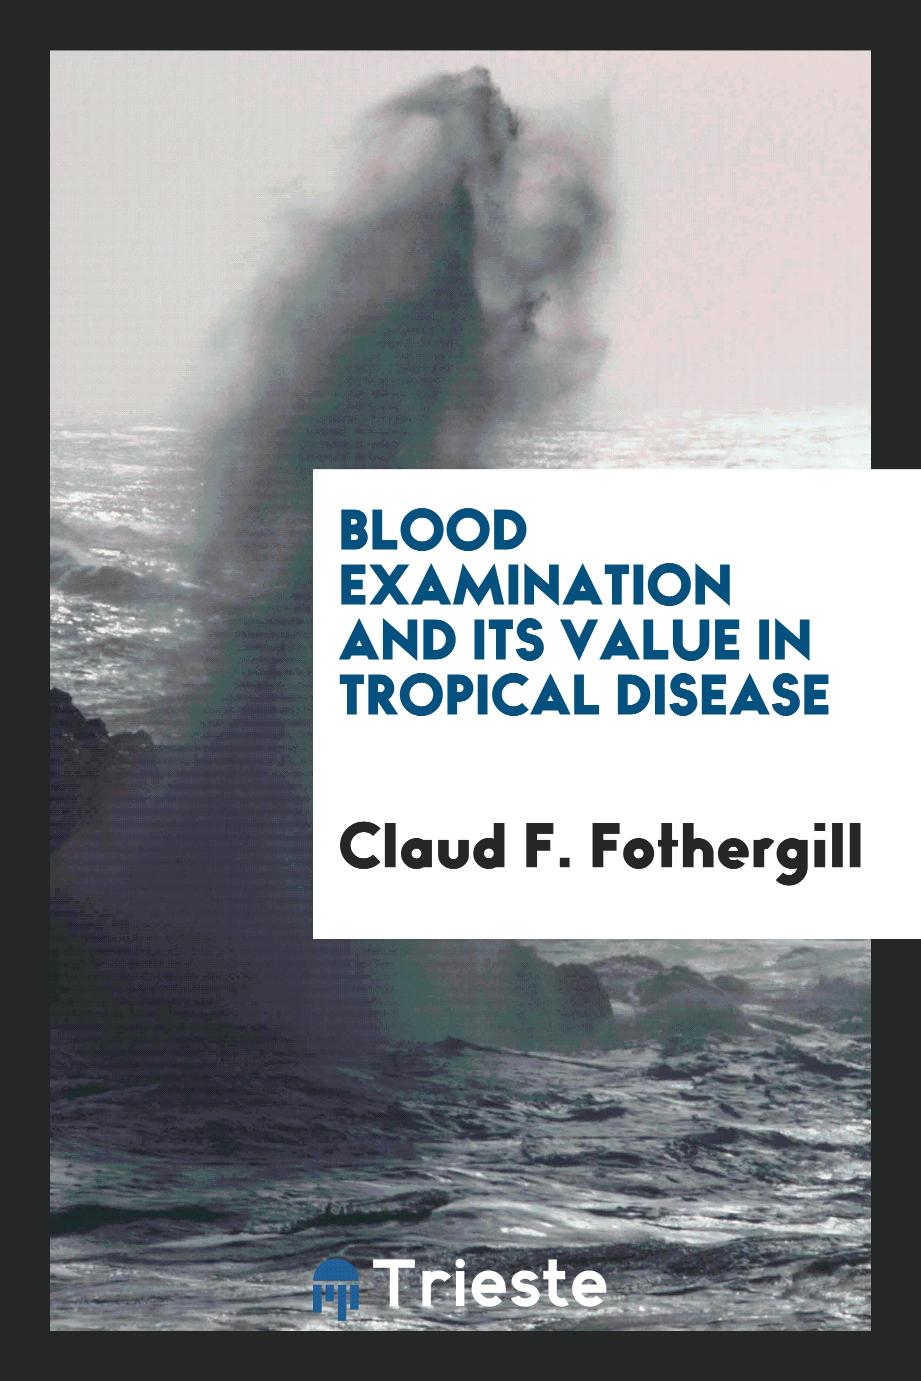 Blood Examination and Its Value in Tropical Disease